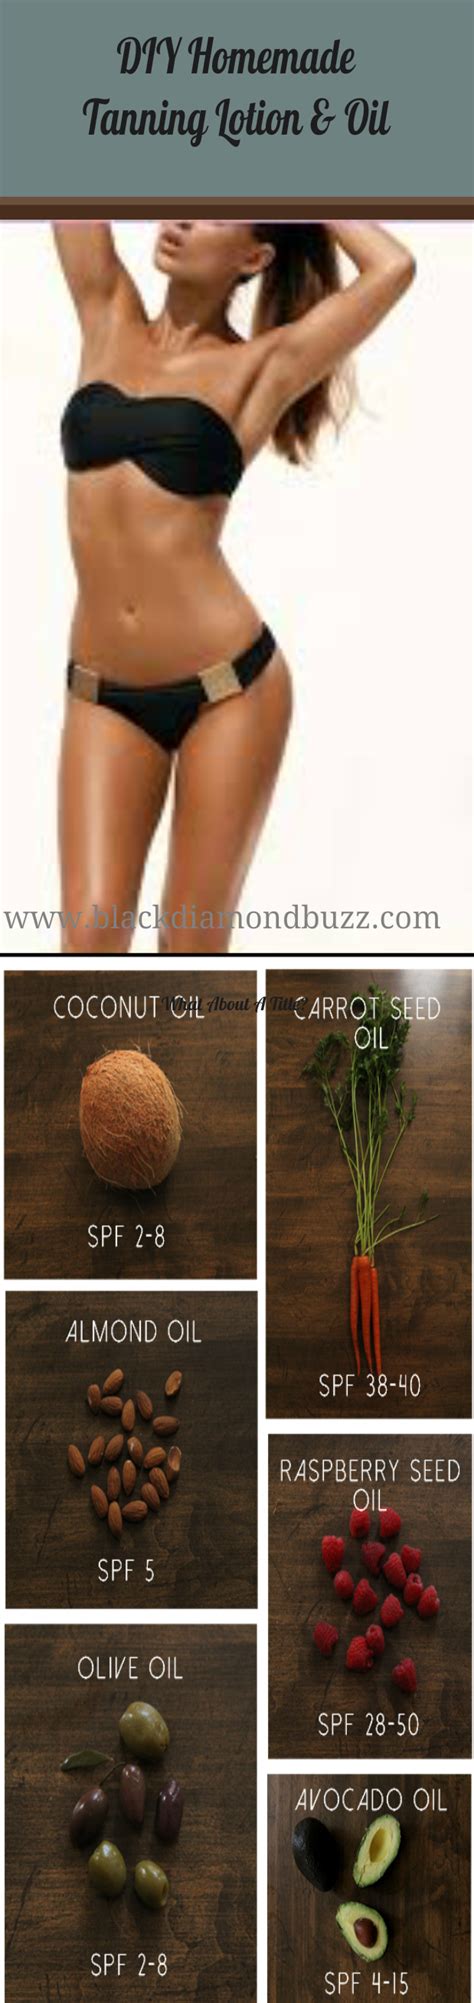 Diy tanning lotion ingredients you can use. DIY Natural Homemade Tanning Lotion & Oil Homemade Tanning Lotion & Oil - Summer is here again ...